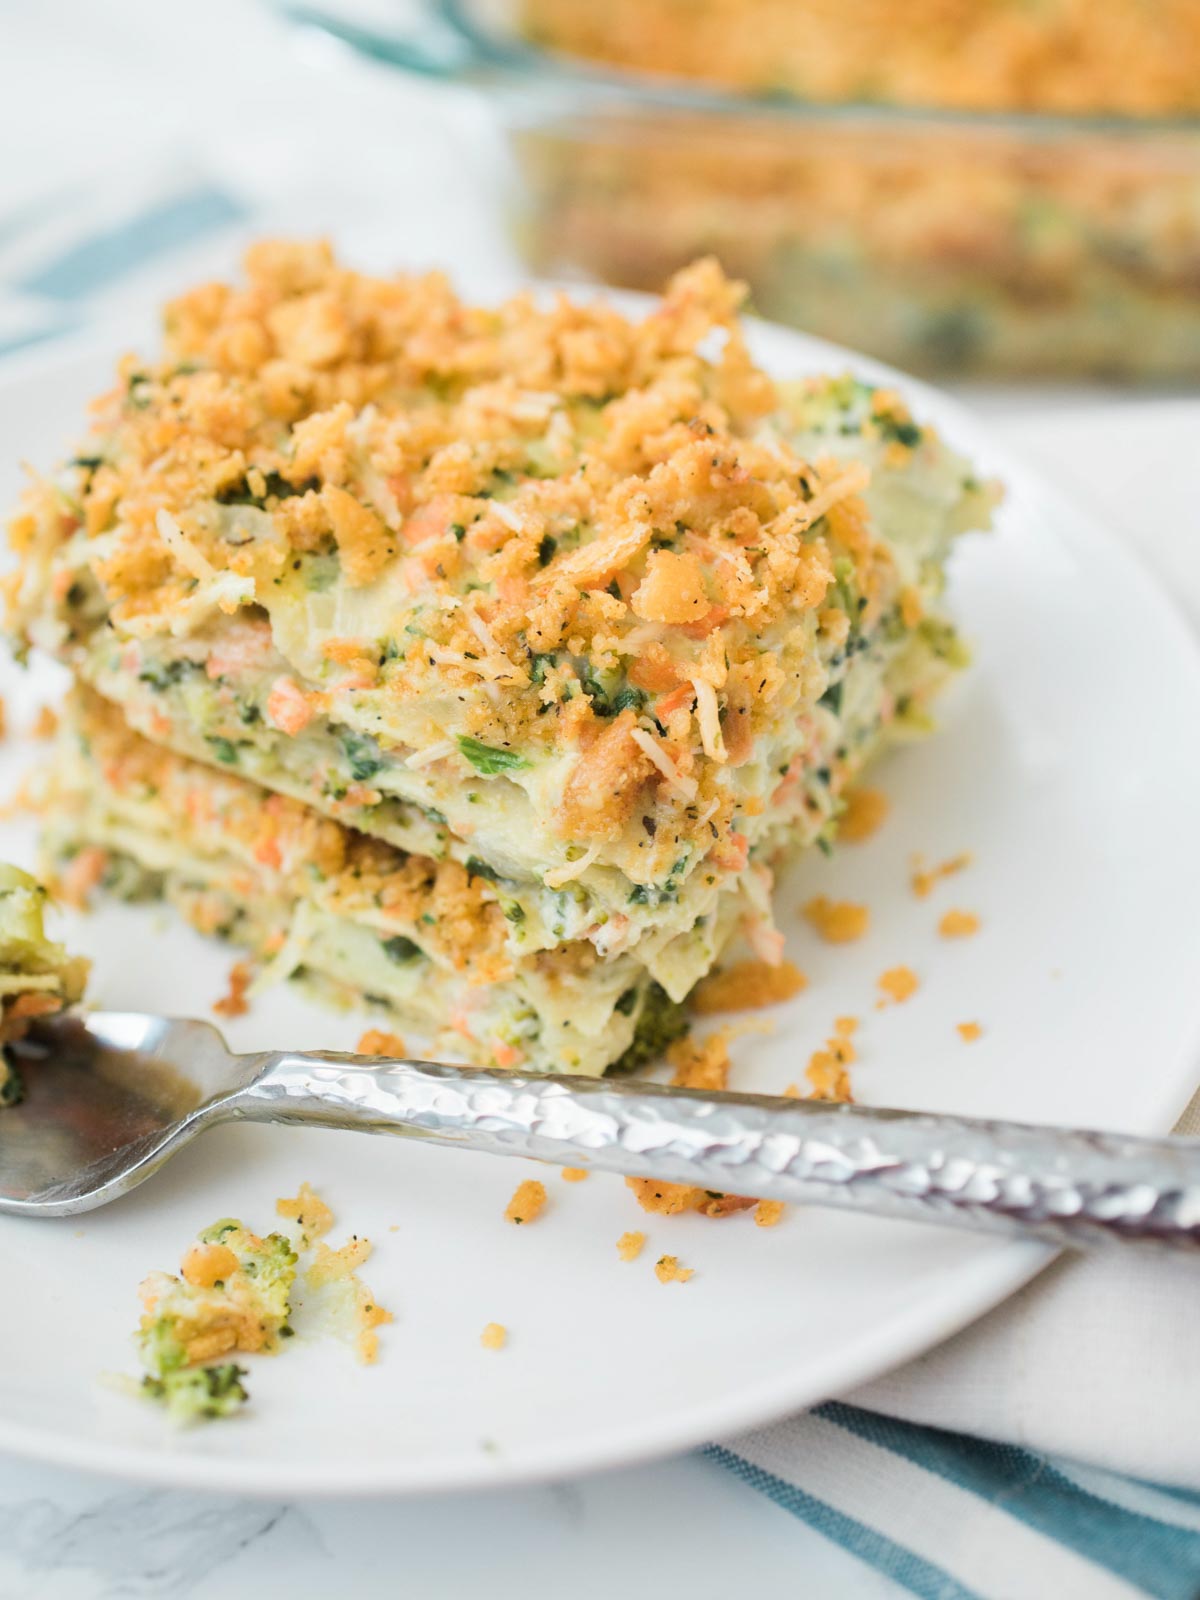 A serving of vegetable lasagna with a fork